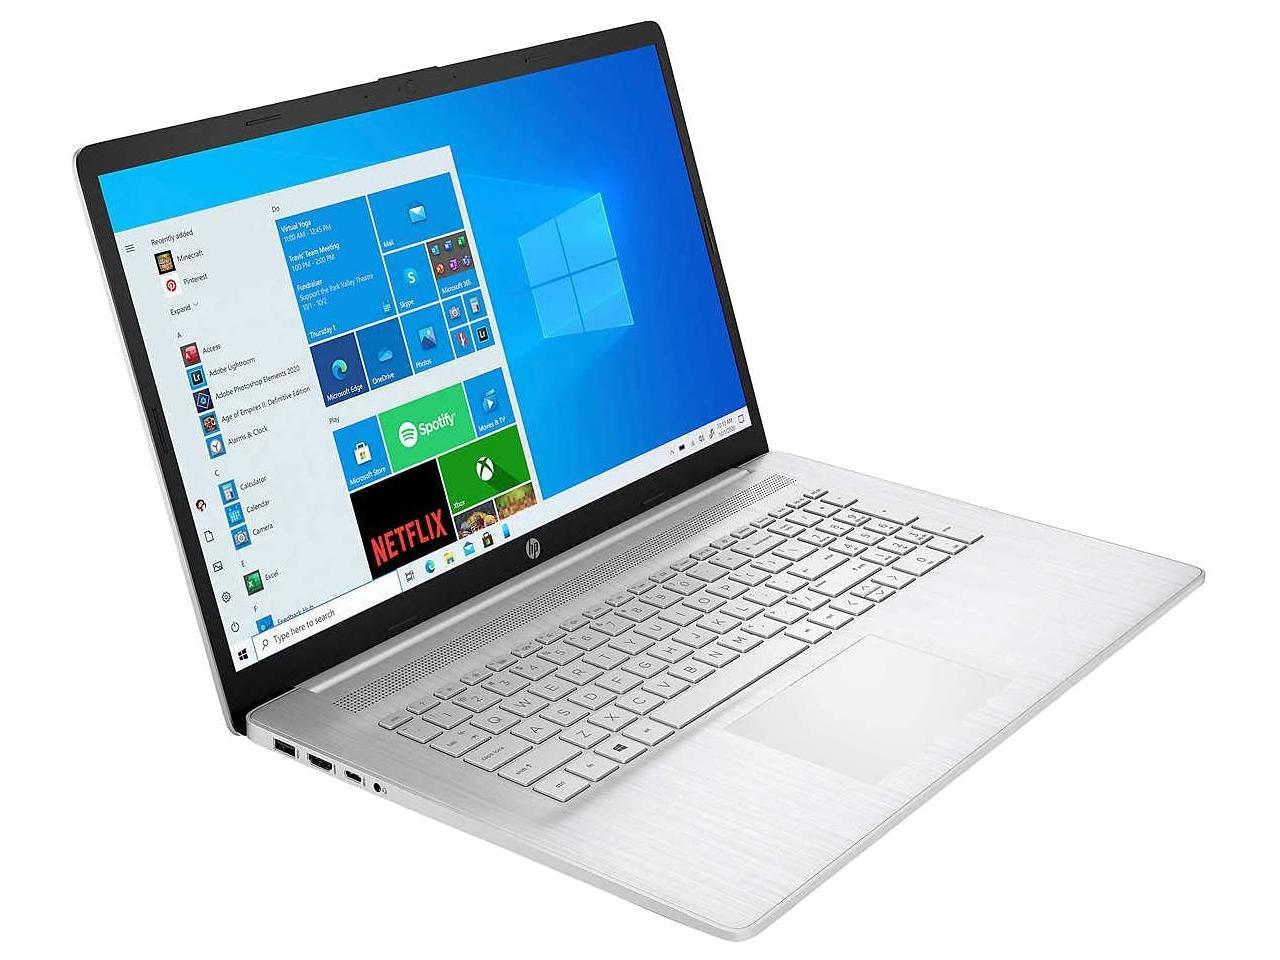 Newest Hp 17T Laptop, 17.3" Hd+ Touchscreen, Intel Core I5-1135G7 Processor 2.4Ghz To 4.2Ghz, 32Gb